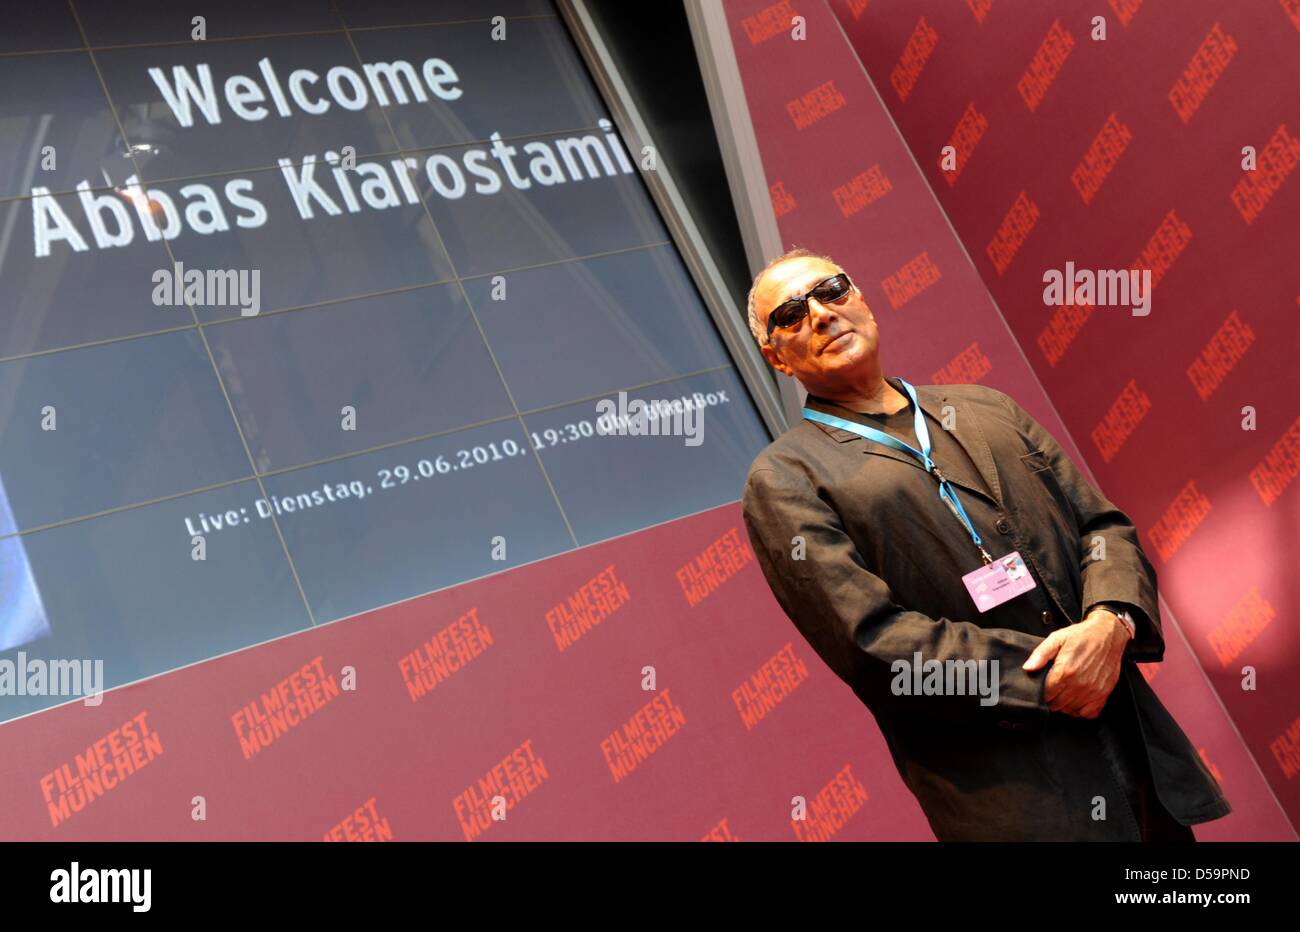 Iranian director Abbas Kiarostami before being awarded the CineMerit Award during the Munich Film Festival in Munich, Germany, 29 June 2010. Since 1997, the award is being given out to outstanding personalities of the International Film Industry. Photo: TOBIAS HASE Stock Photo